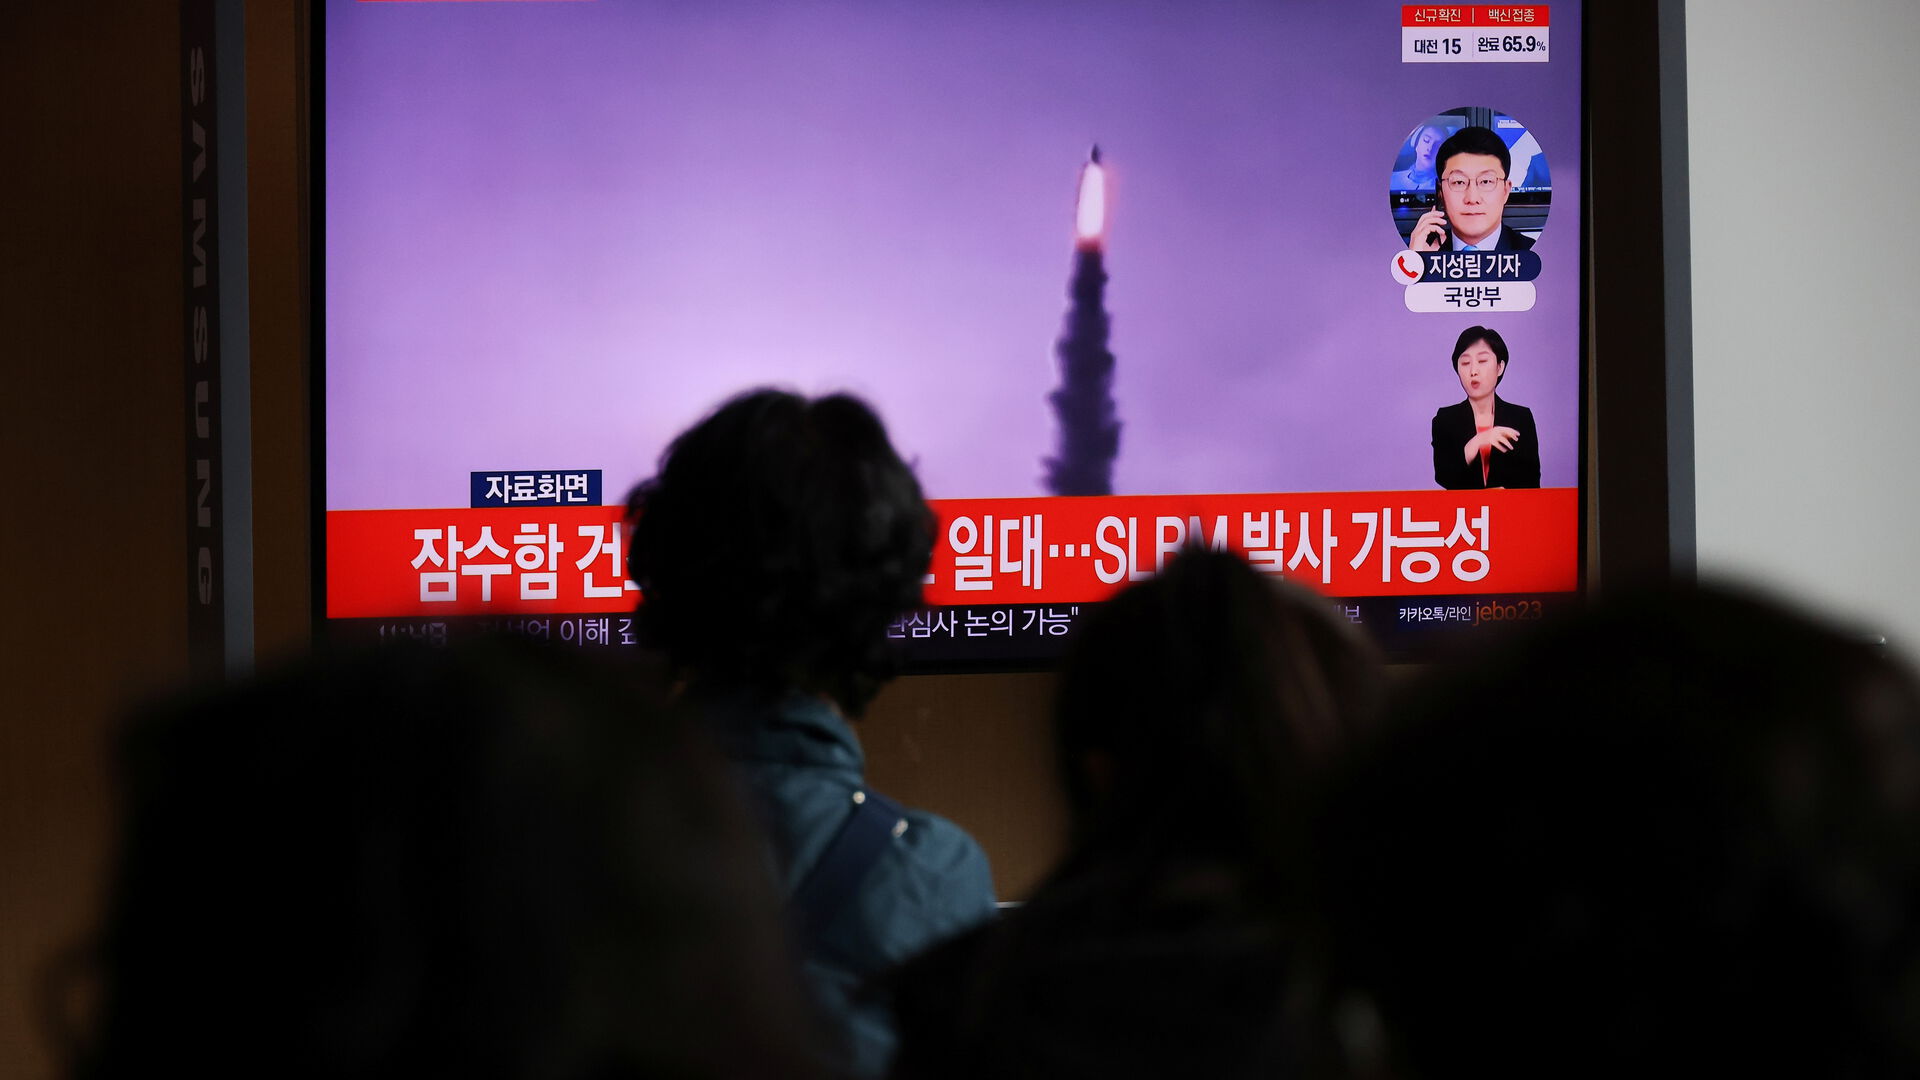 North Korea fired at least one ballistic missile Tuesday